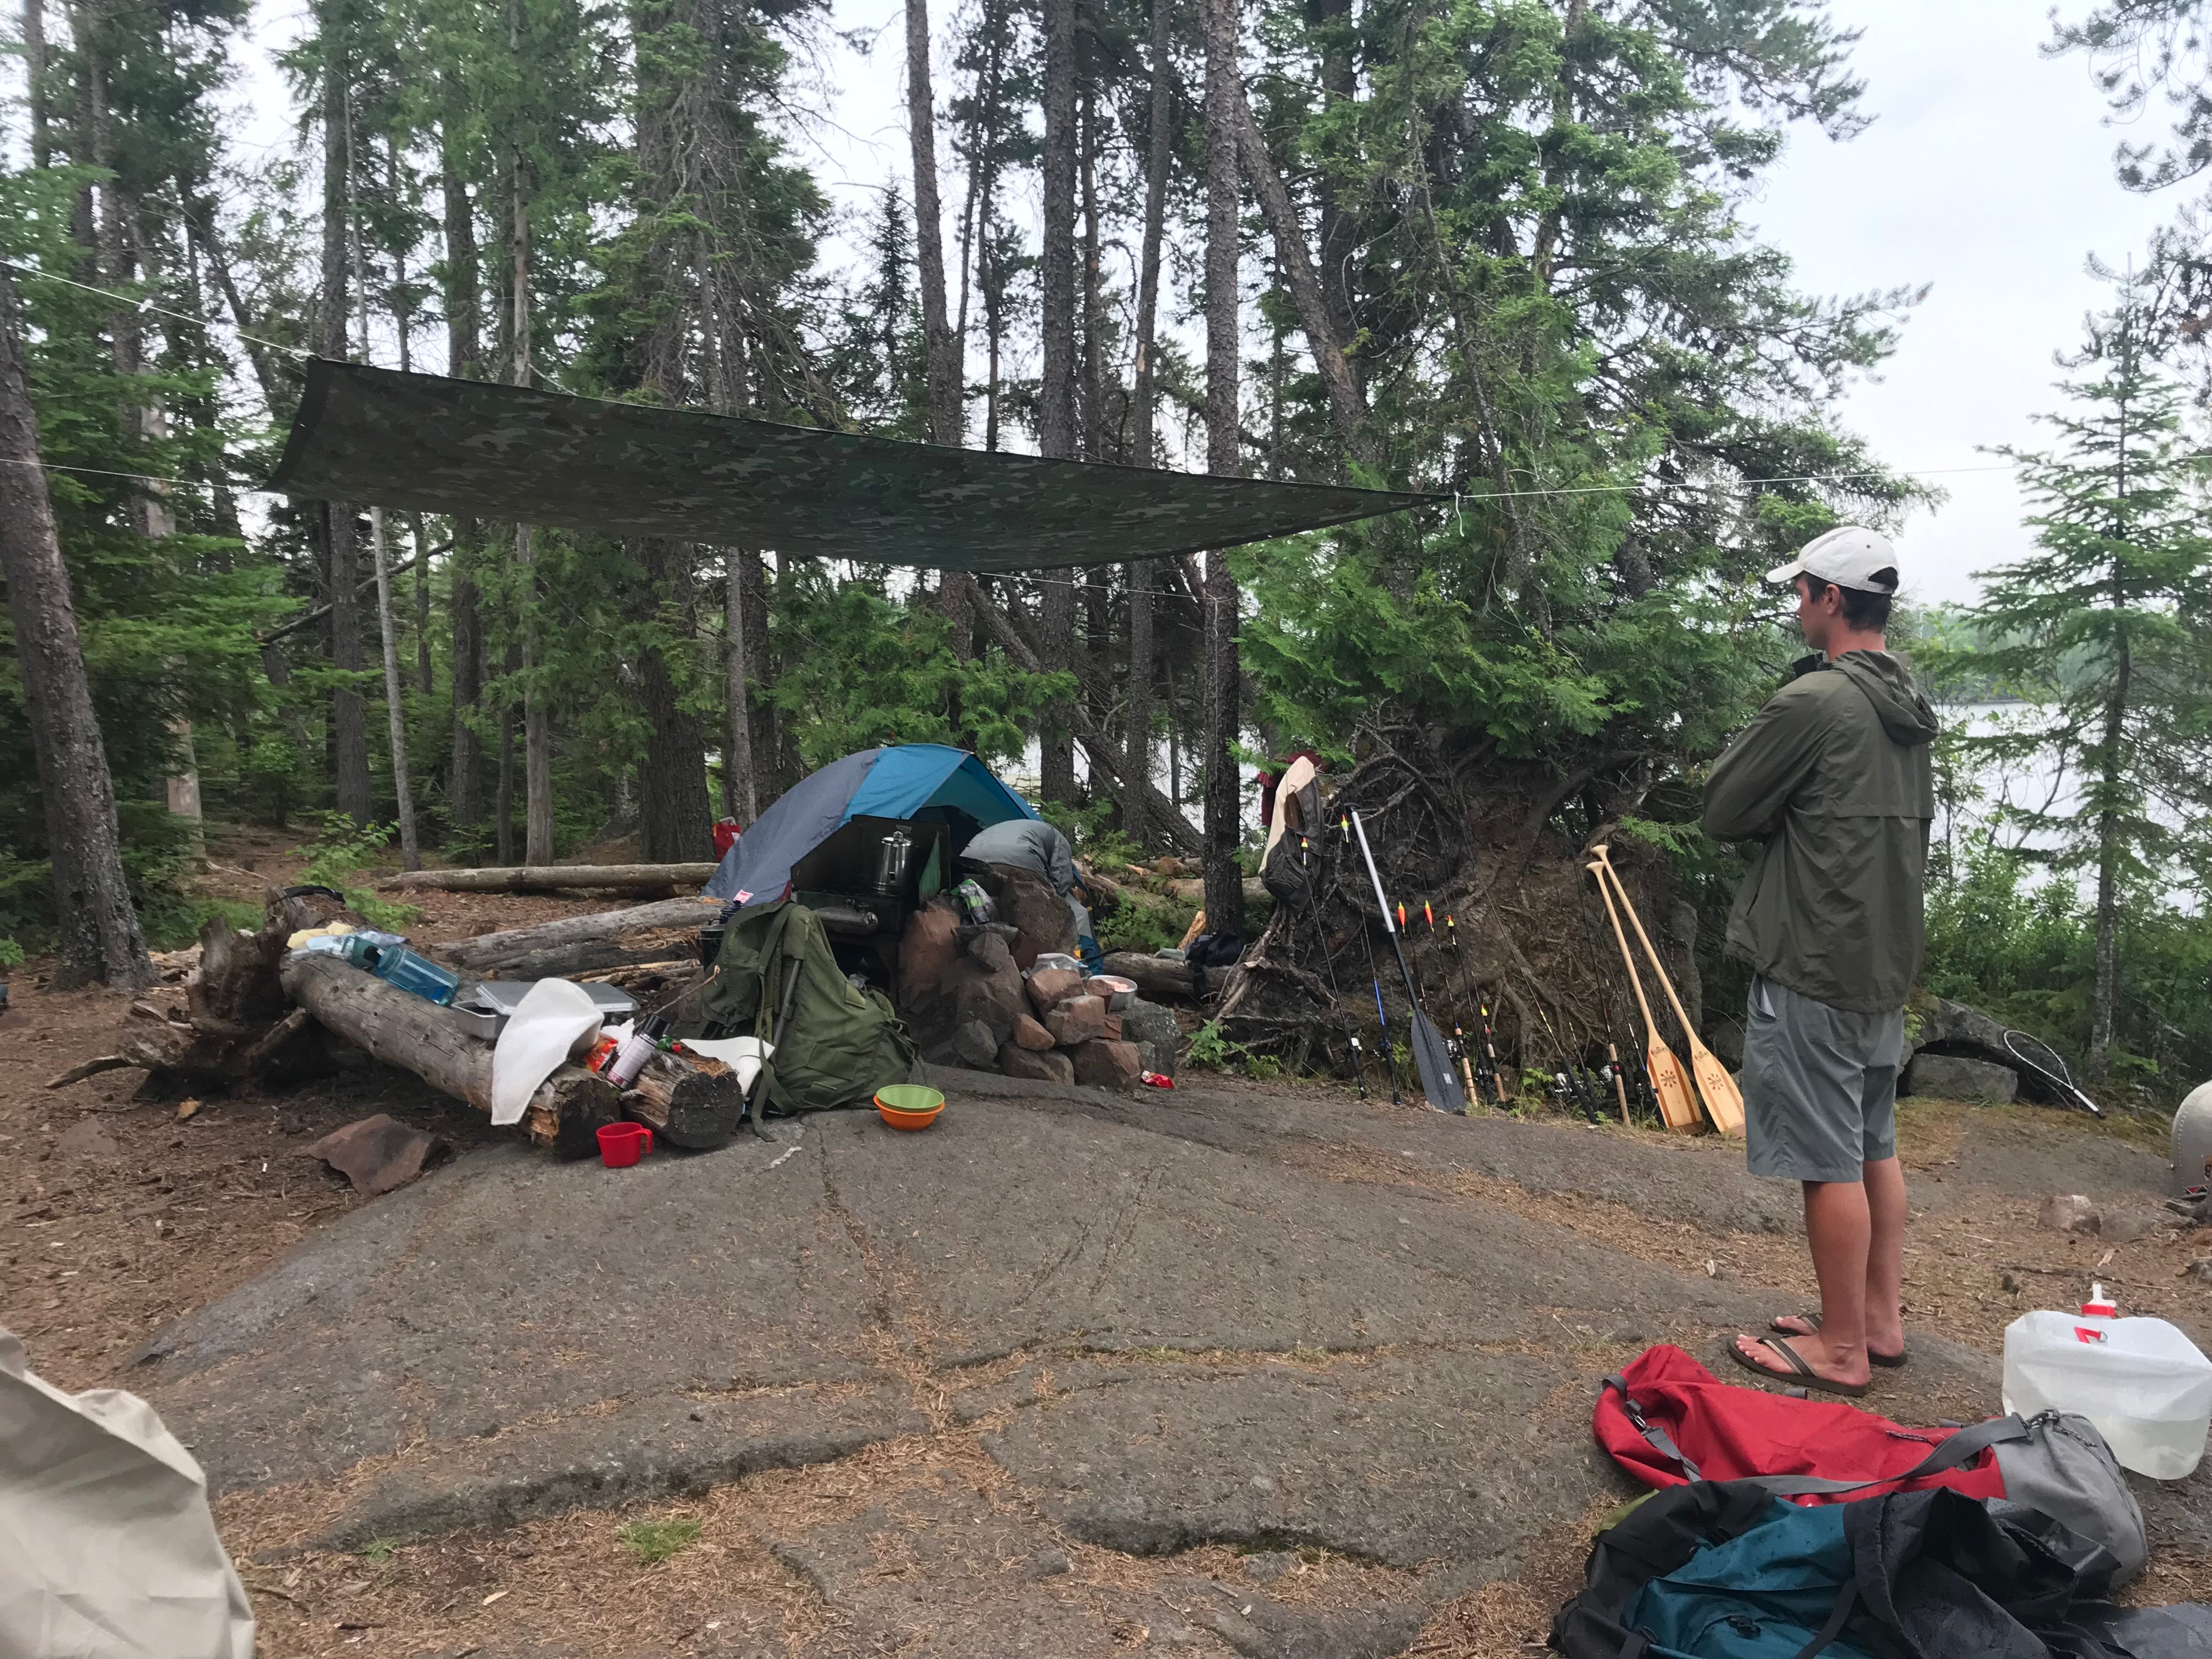 Camper submitted image from Boundary Waters Canoe Area, North Temperance Lake Backcountry Camping Site #905 - 2